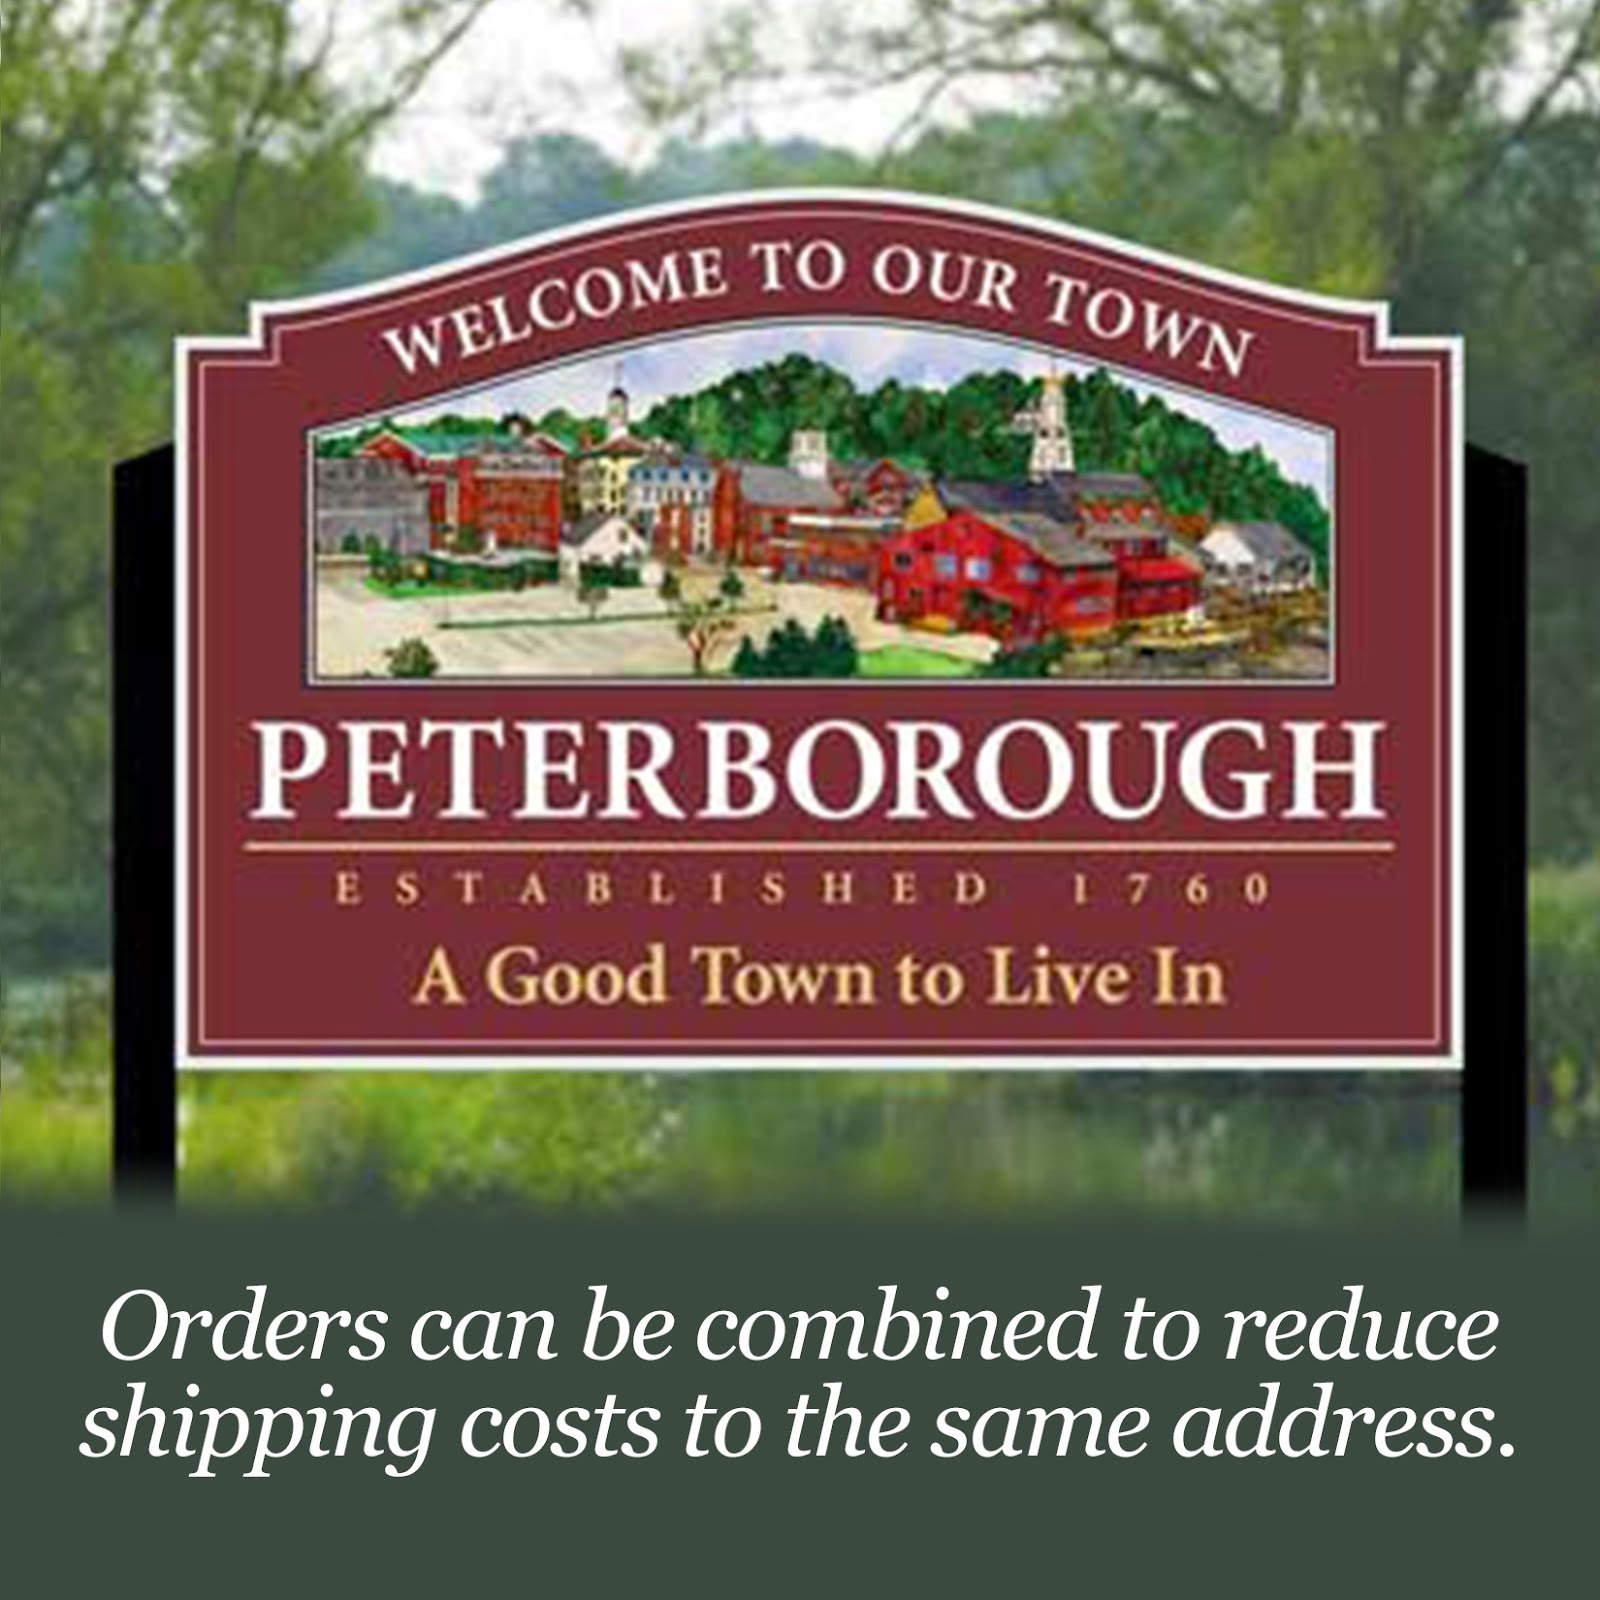 SHIPPING: USPS from Peterborough, NH, USA